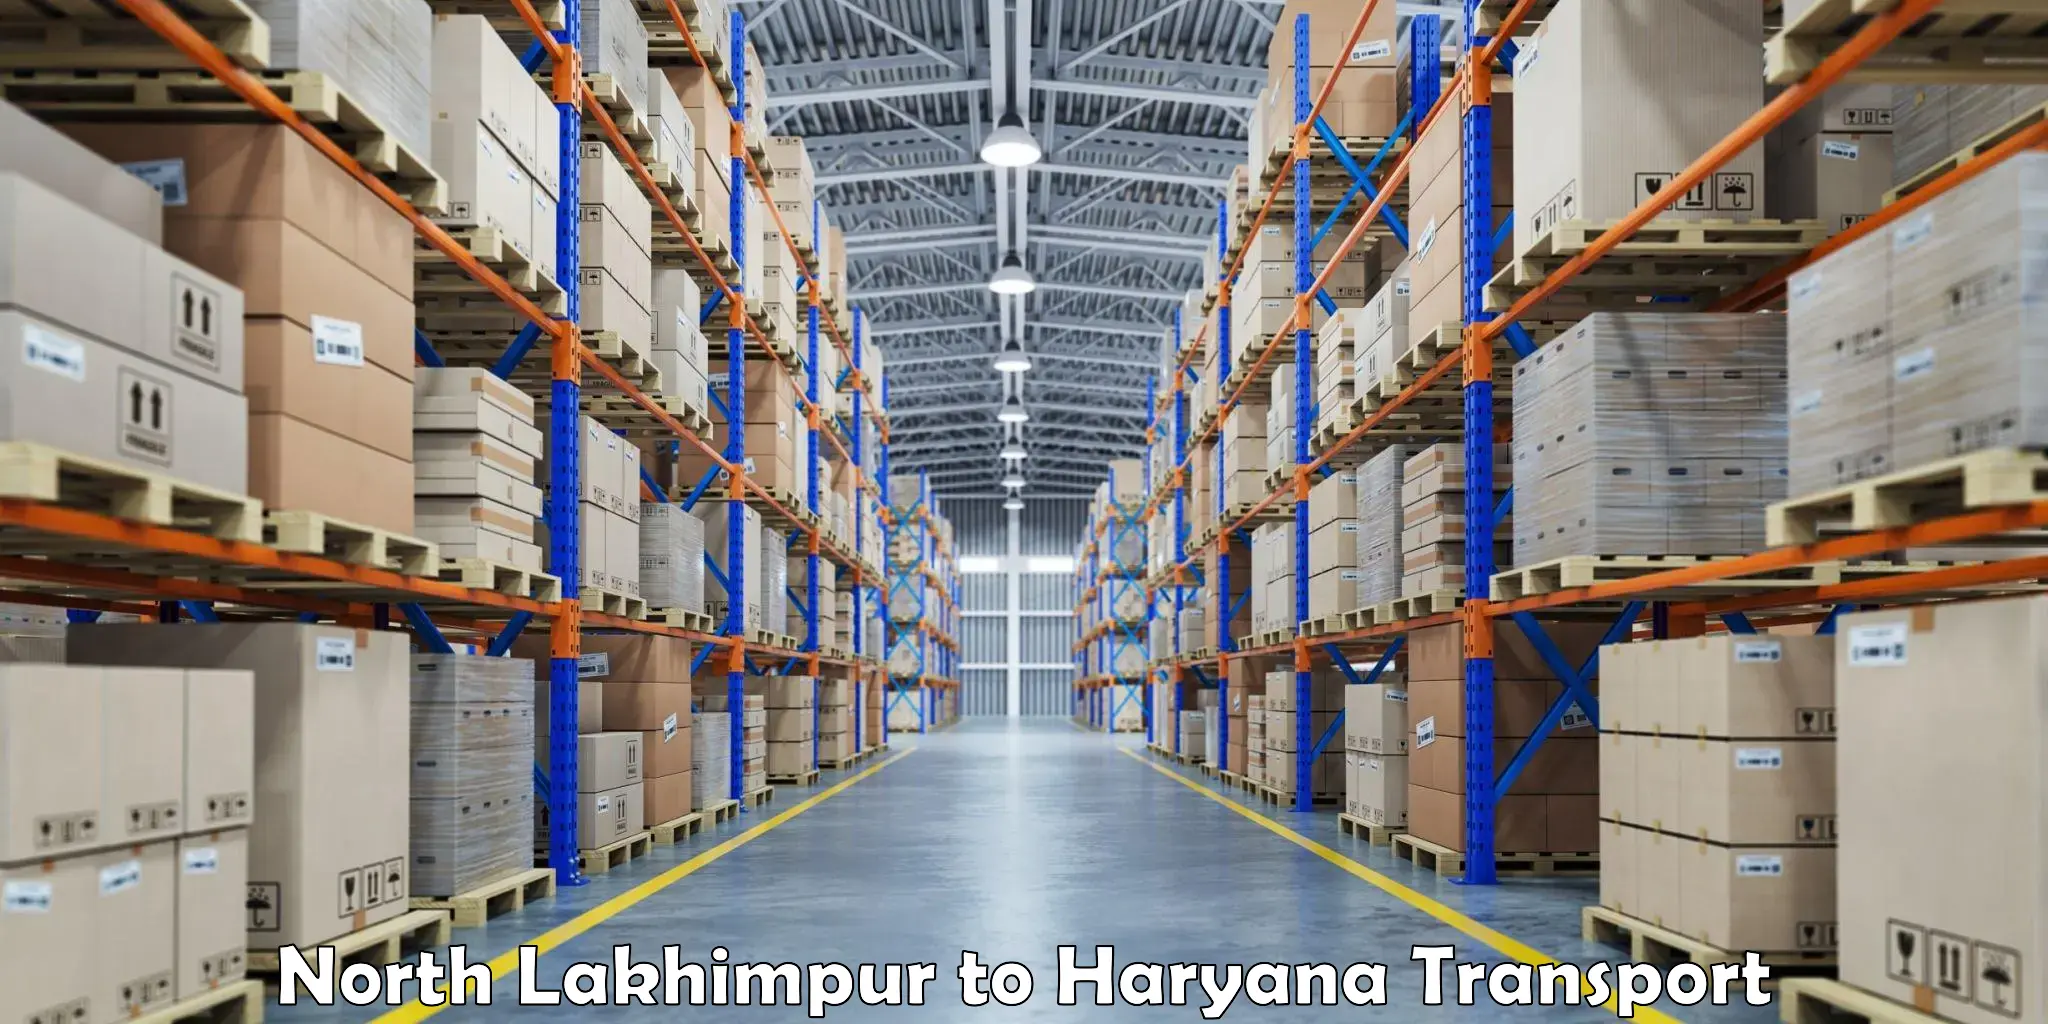 Container transport service North Lakhimpur to Faridabad